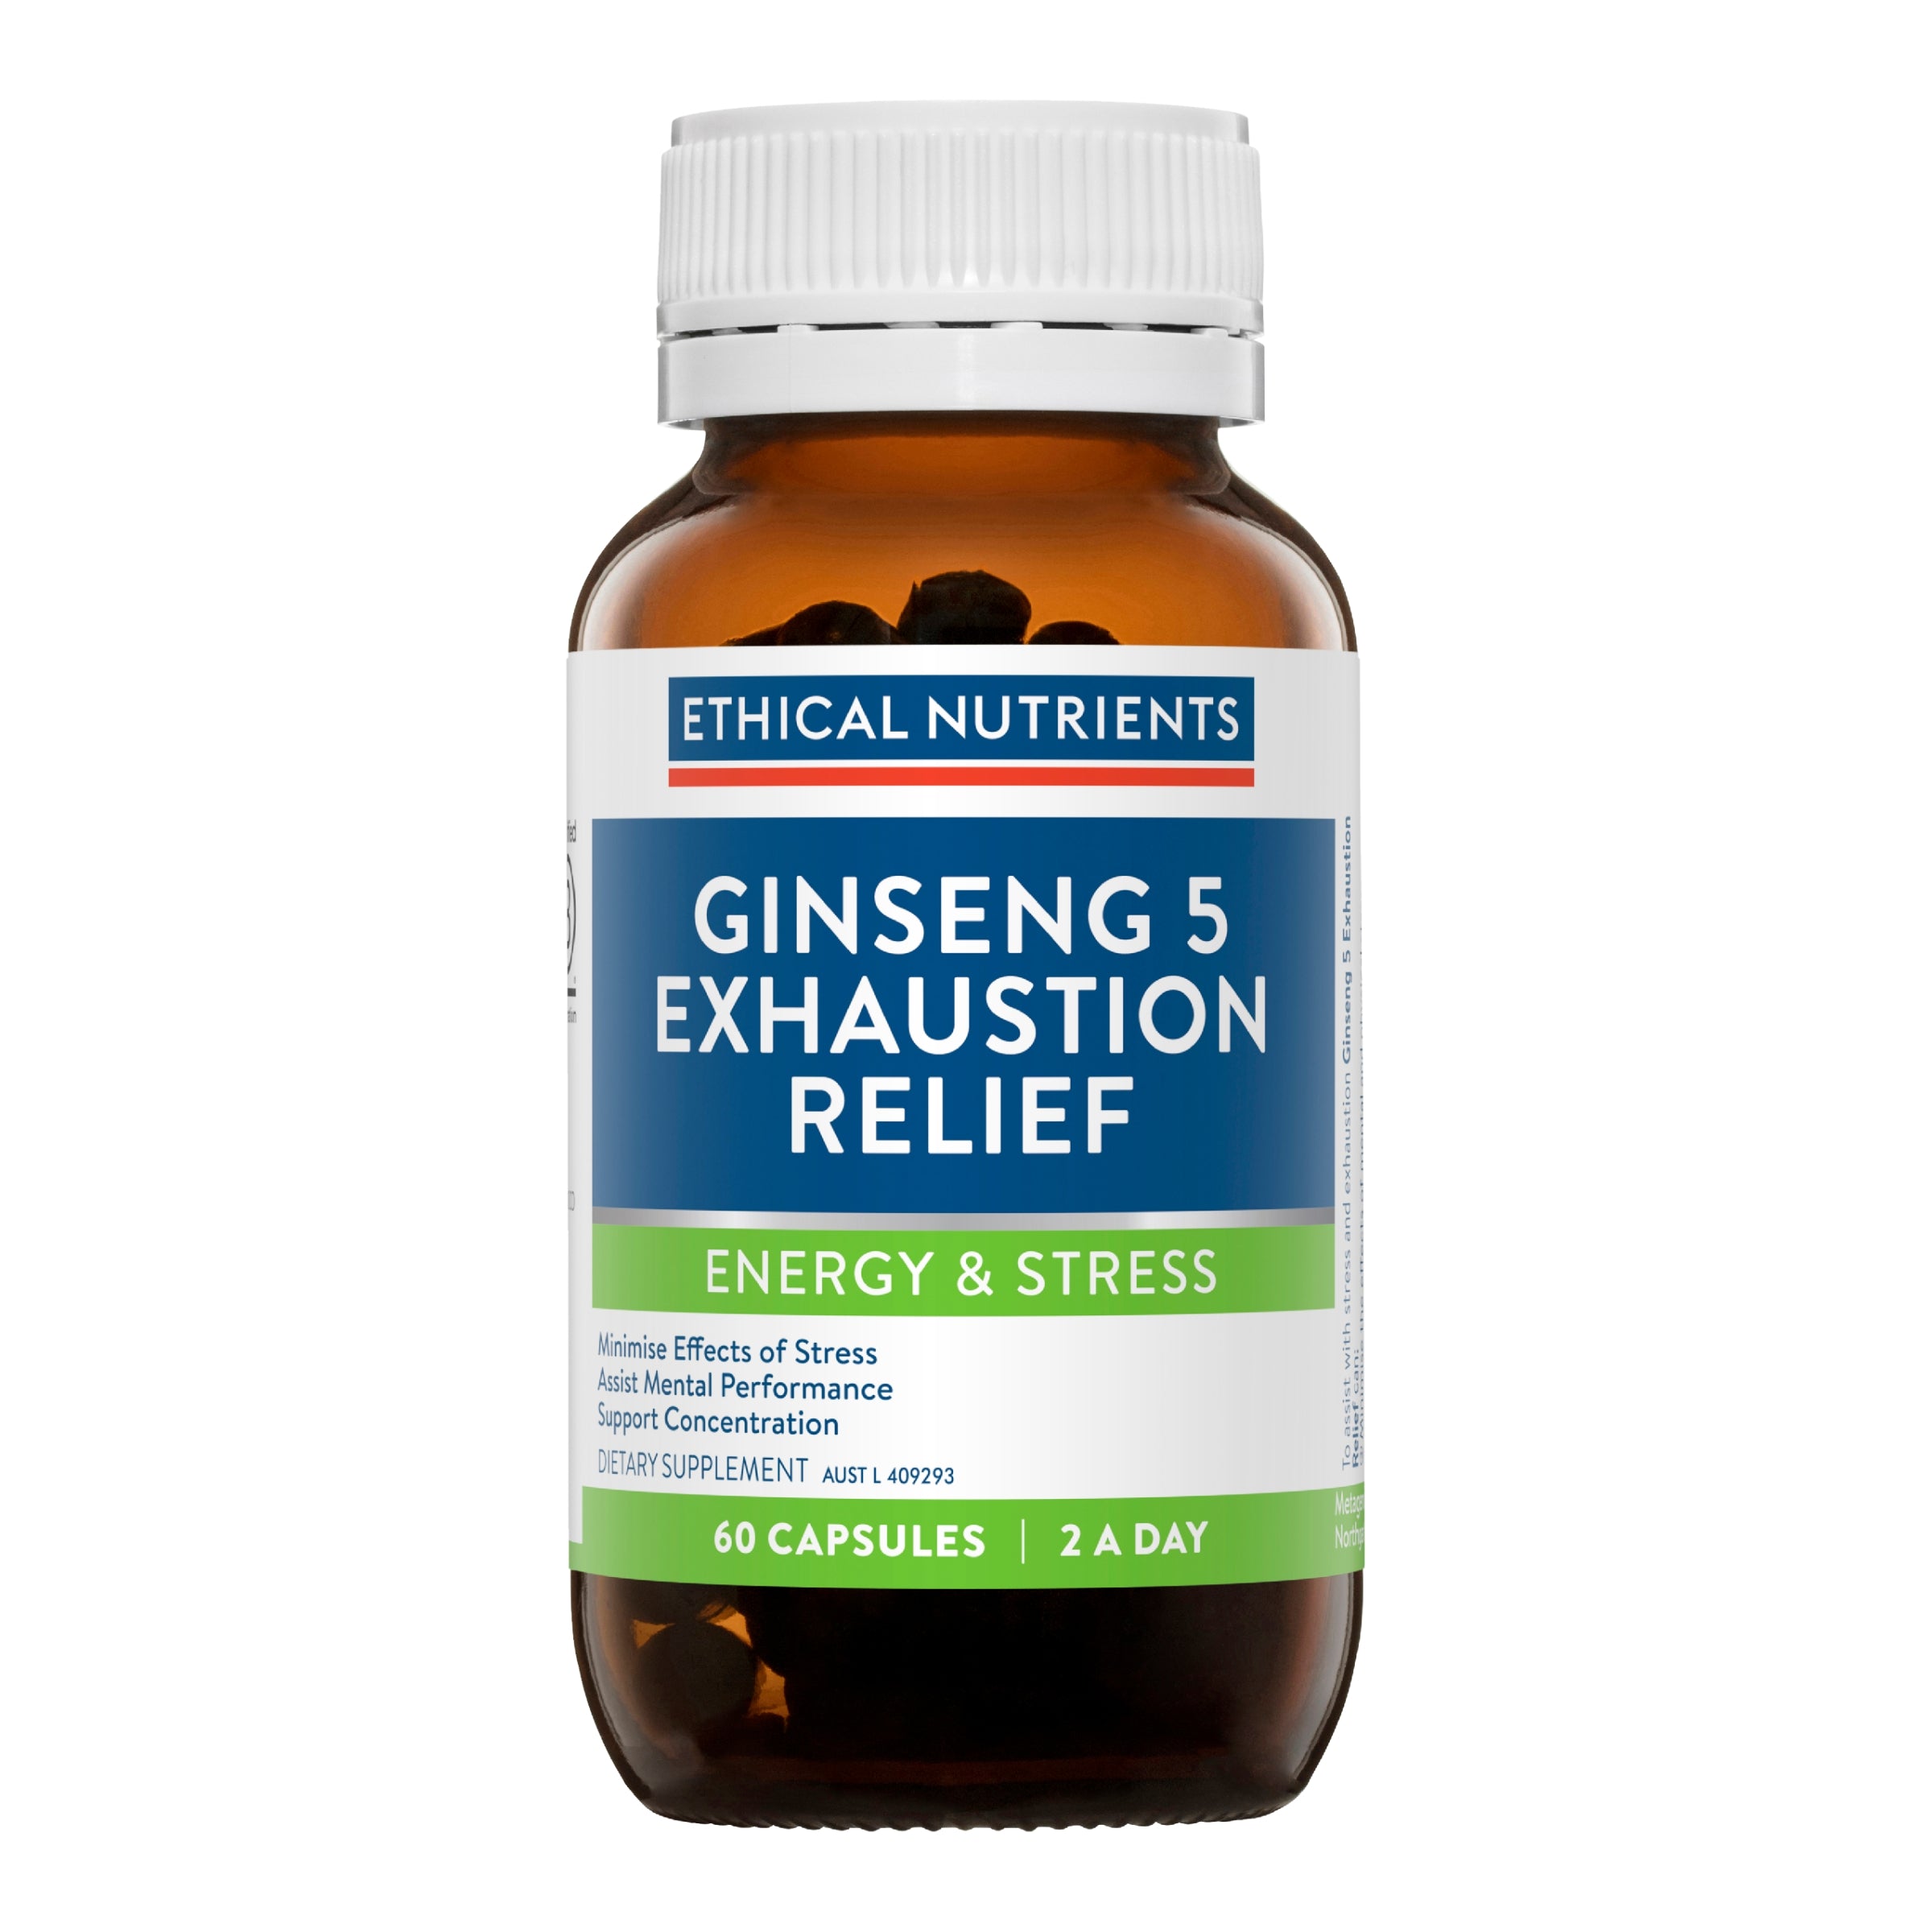 Ethical Nutrients Ginseng 5 Exhaustion Relief 60 Capsules #size_60 capsules